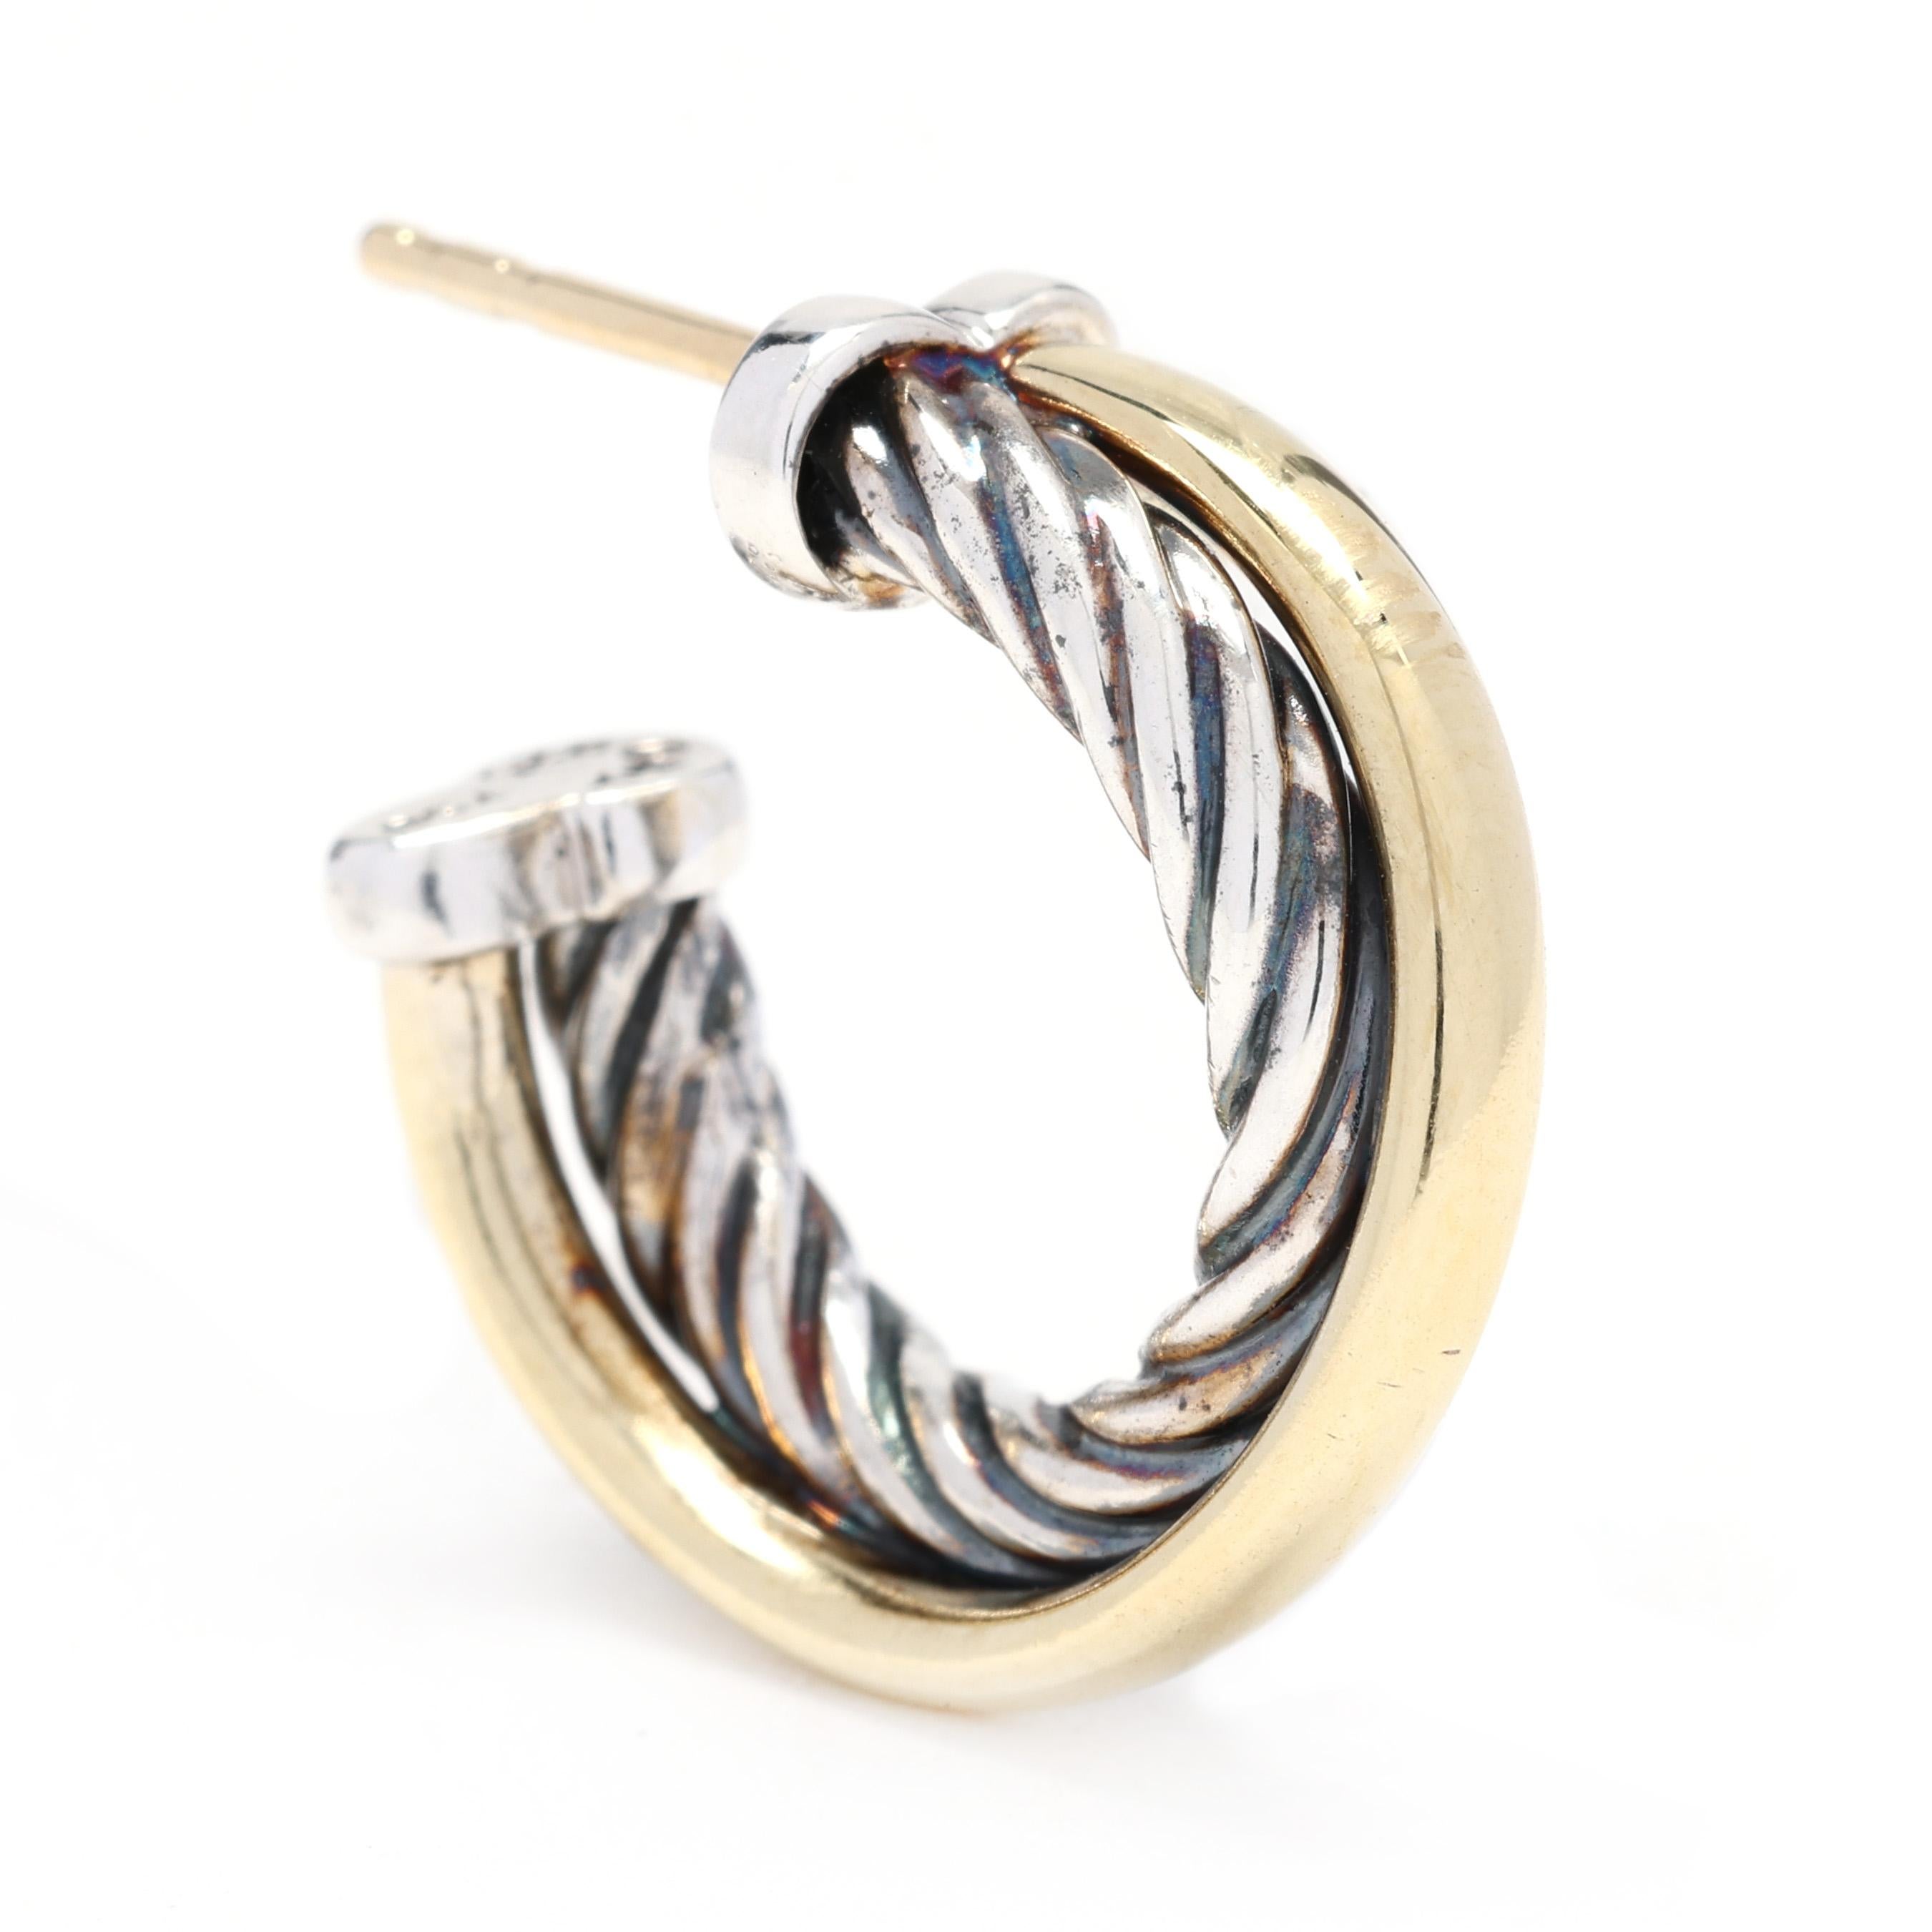 These David Yurman small twisted hoops are a beautiful combination of sterling silver and 18k yellow gold, creating a stunning crossover design. The unique twisted texture adds an element of sophistication and elegance to these classic hoop